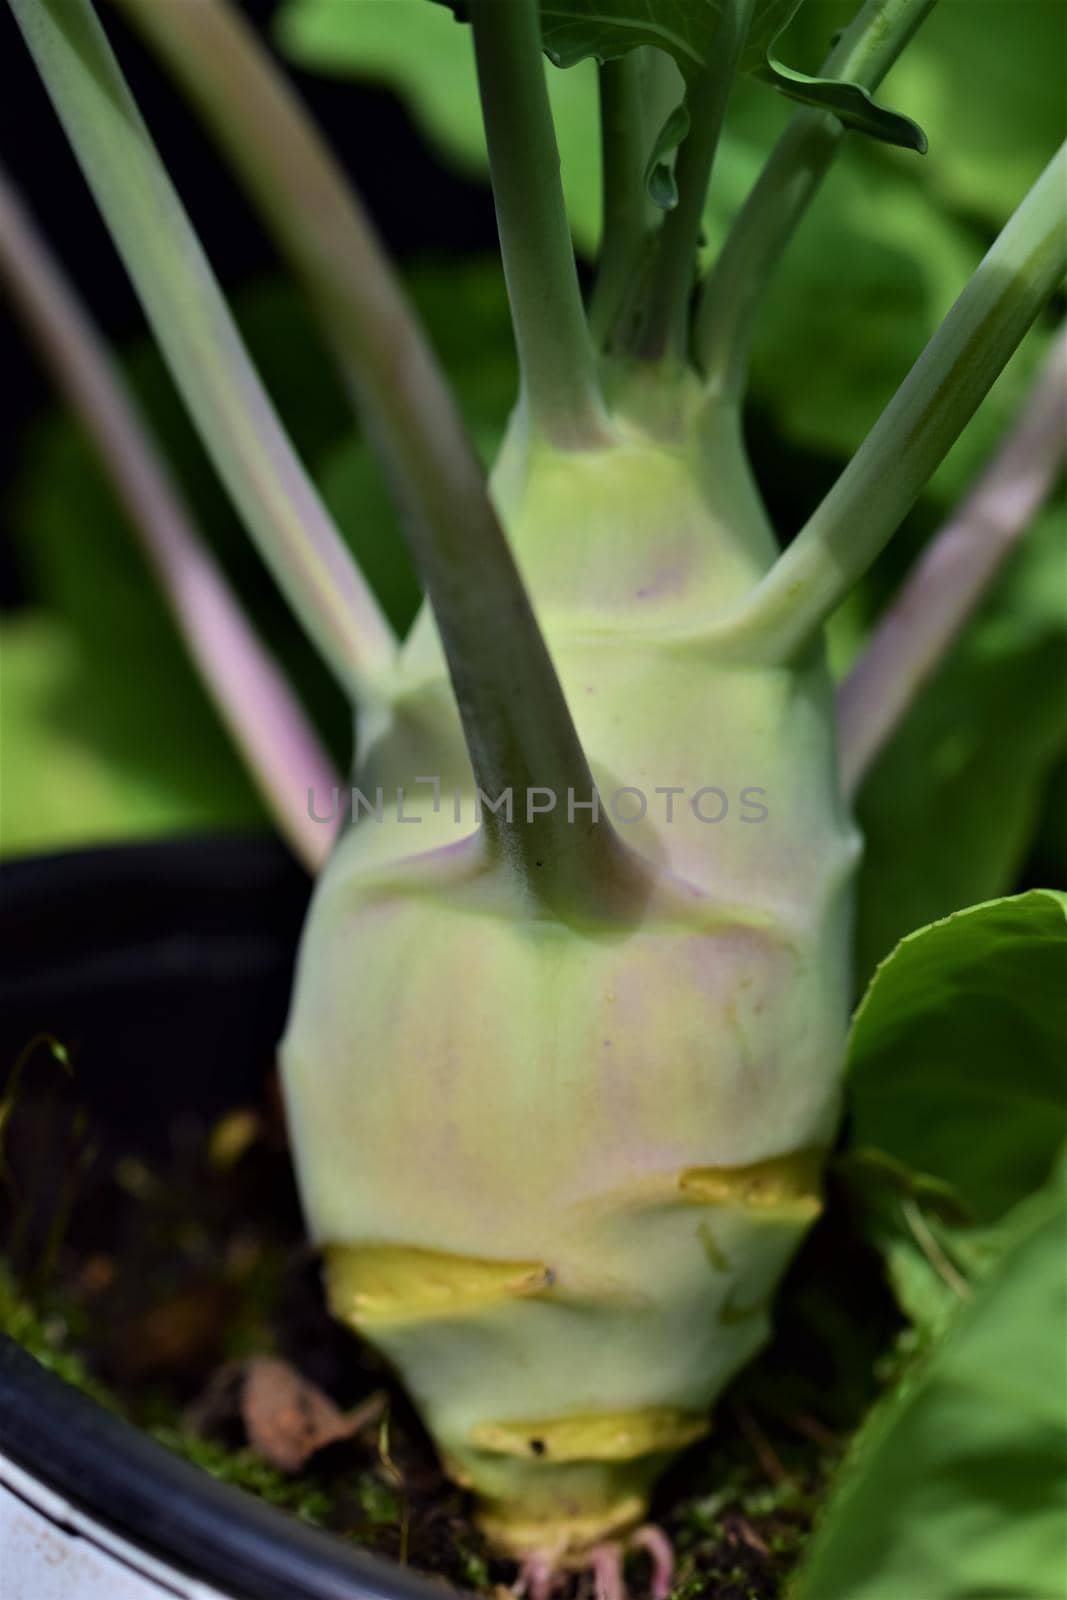 Pear shaped kohlrabi as a close up by Luise123